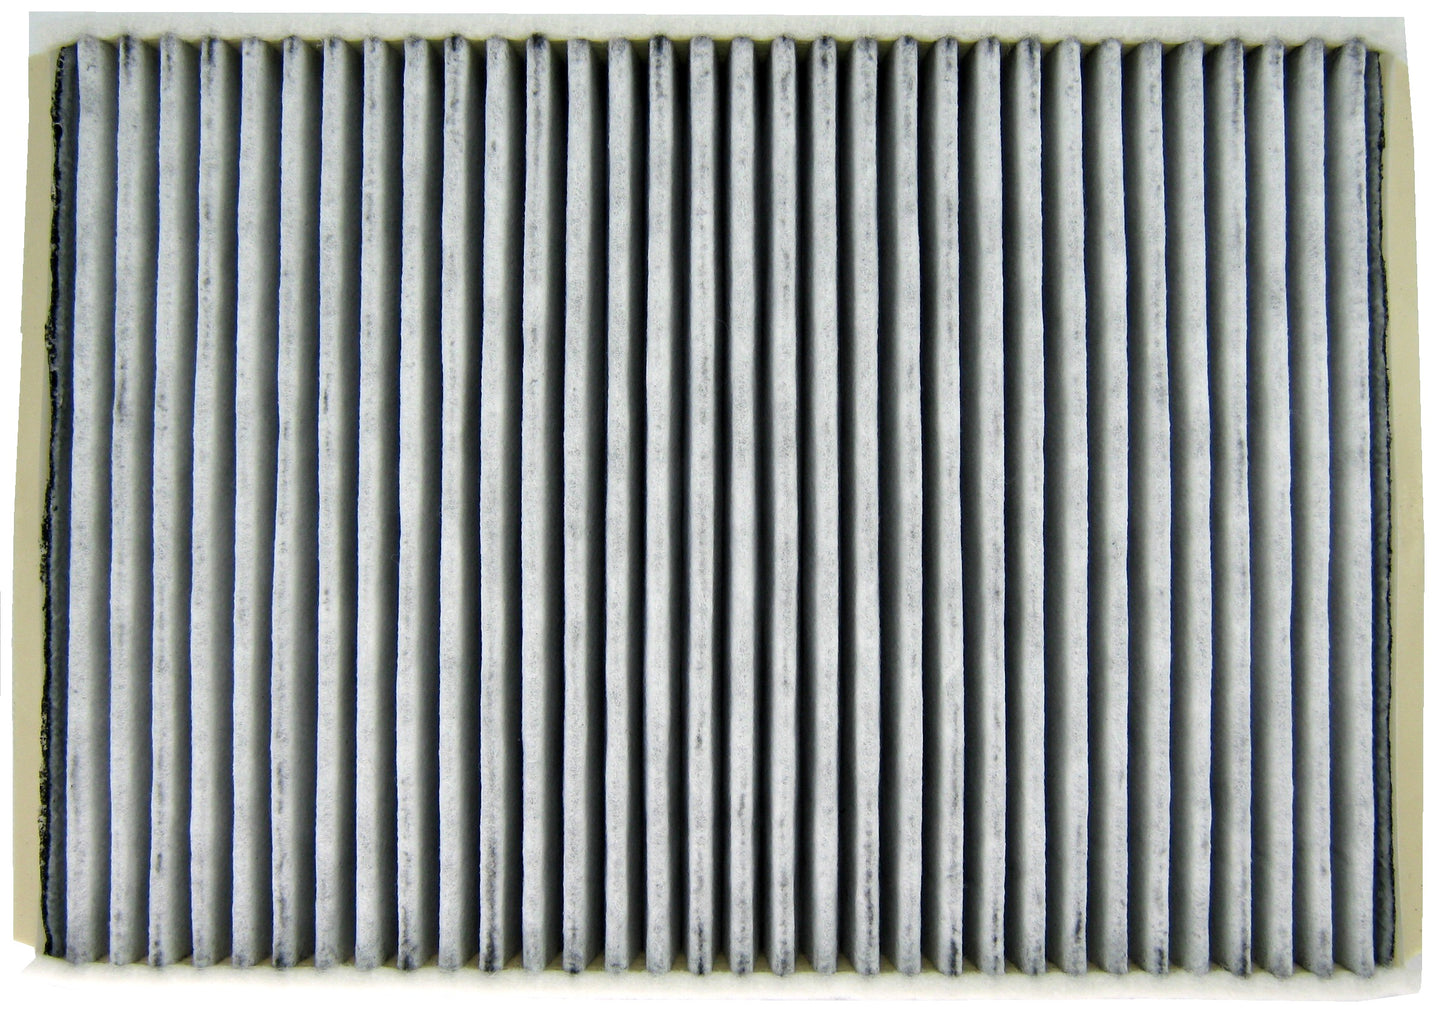 Replacement Cabin Pollen Filter for Land Rover Freelander 2 - Carbon Type - Genuine